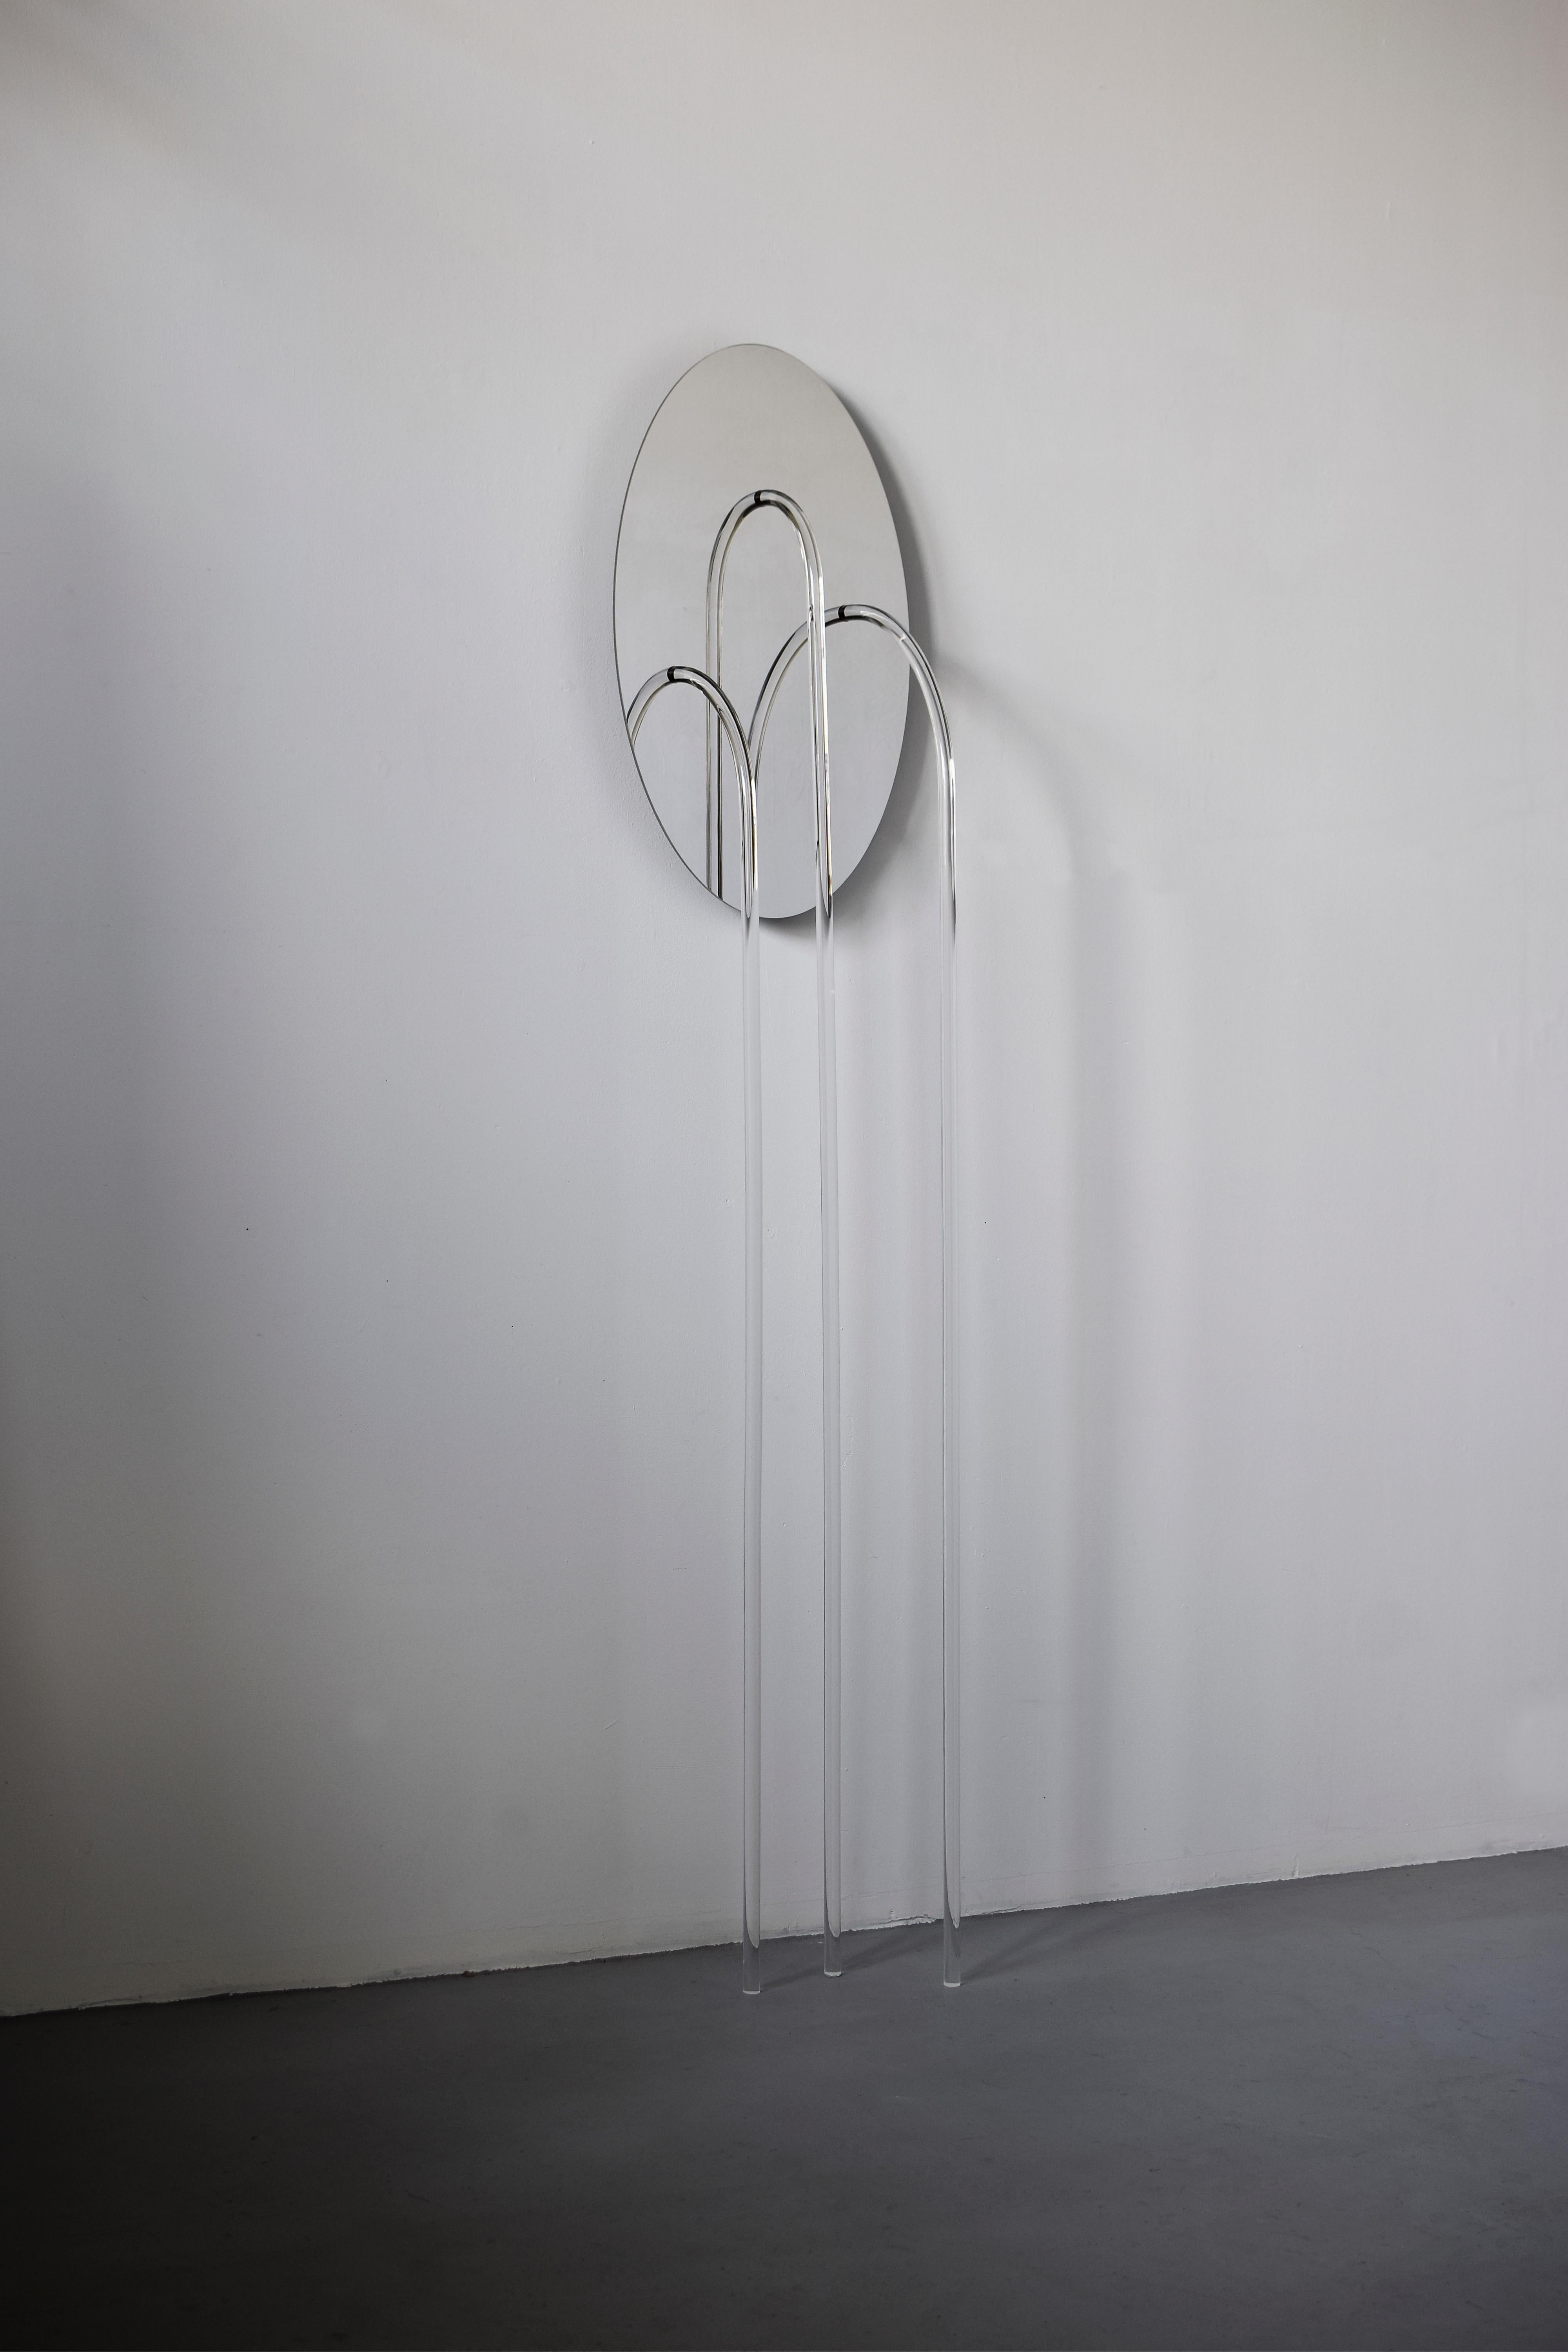 Elusive 06
A beautiful piece exploring the line between visible and invisible: half mirror, half floor lamp, half sculpture.
By Maximilian Michaelis.

Polished stainless steel, acrylic glass, Led
Measure: 200 x 40 x 30 cm.